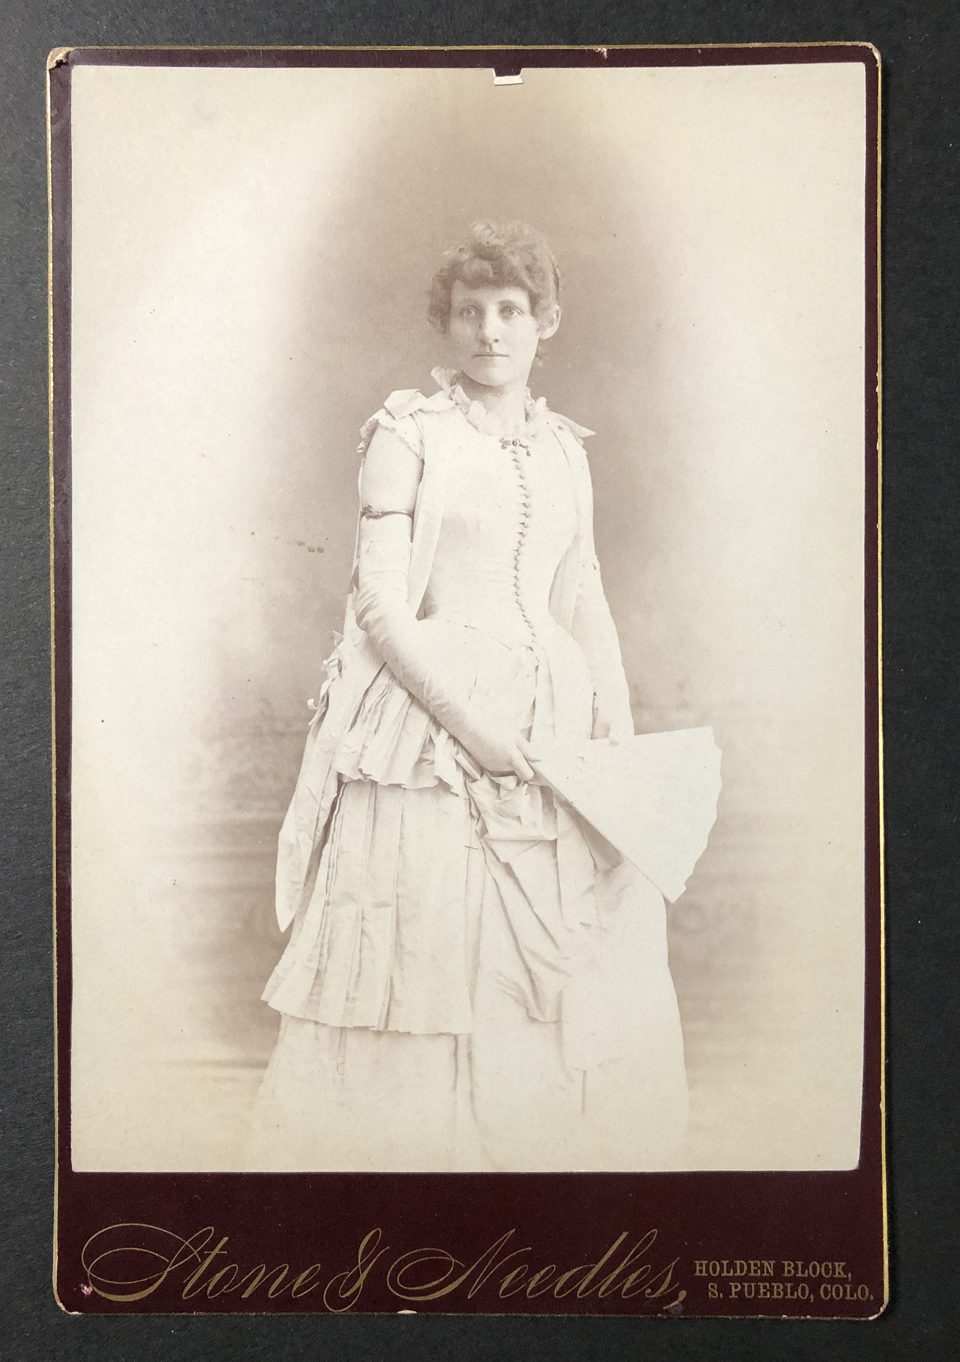 Cabinet card portrait of a young lady in a fancy white dress with long gloves and holding a fan, photographed by the studio of Stone & Needles in South Pueblo,